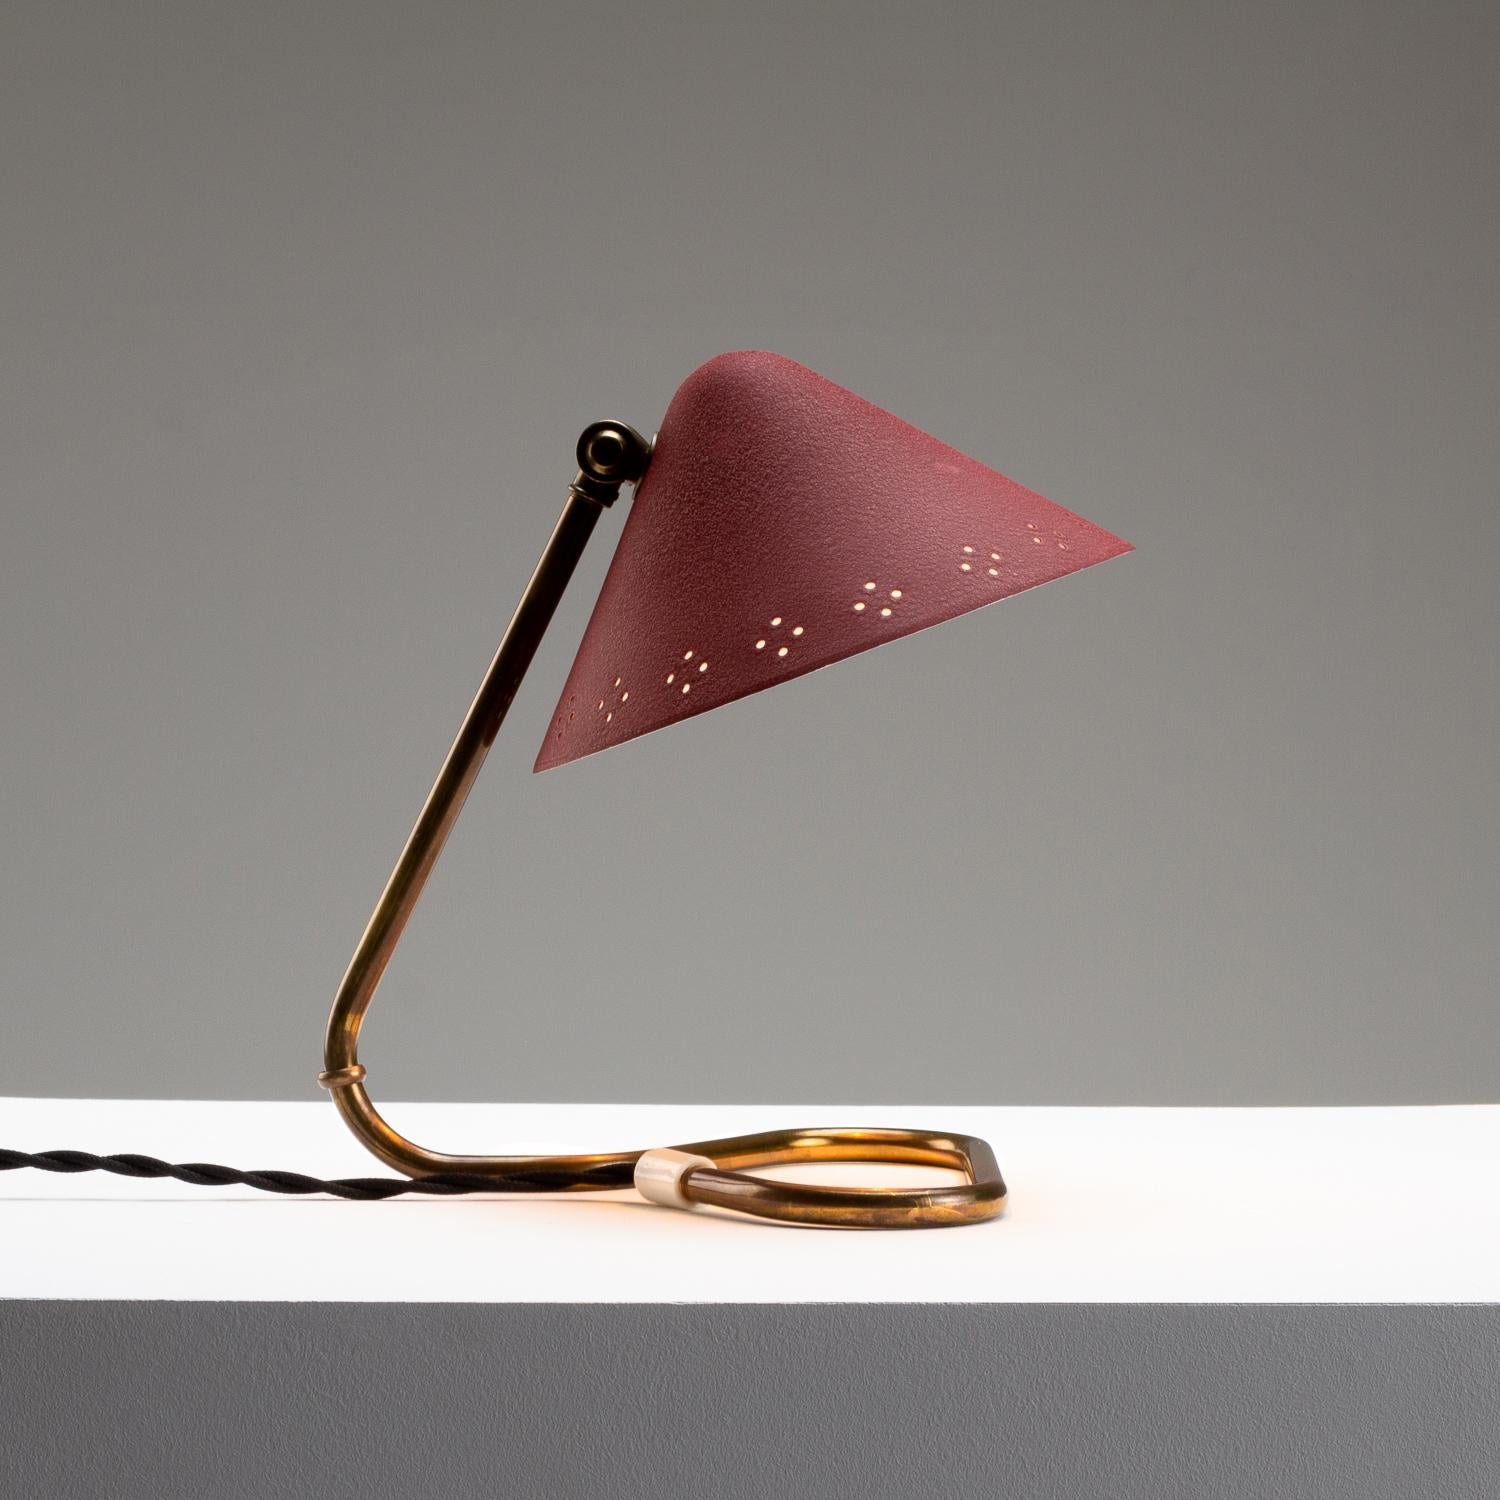 Mid-Century Modern Red Lacquered Aluminium and Brass Table Lamp by Gnosjö Konstsmide, Sweden, 1950s For Sale